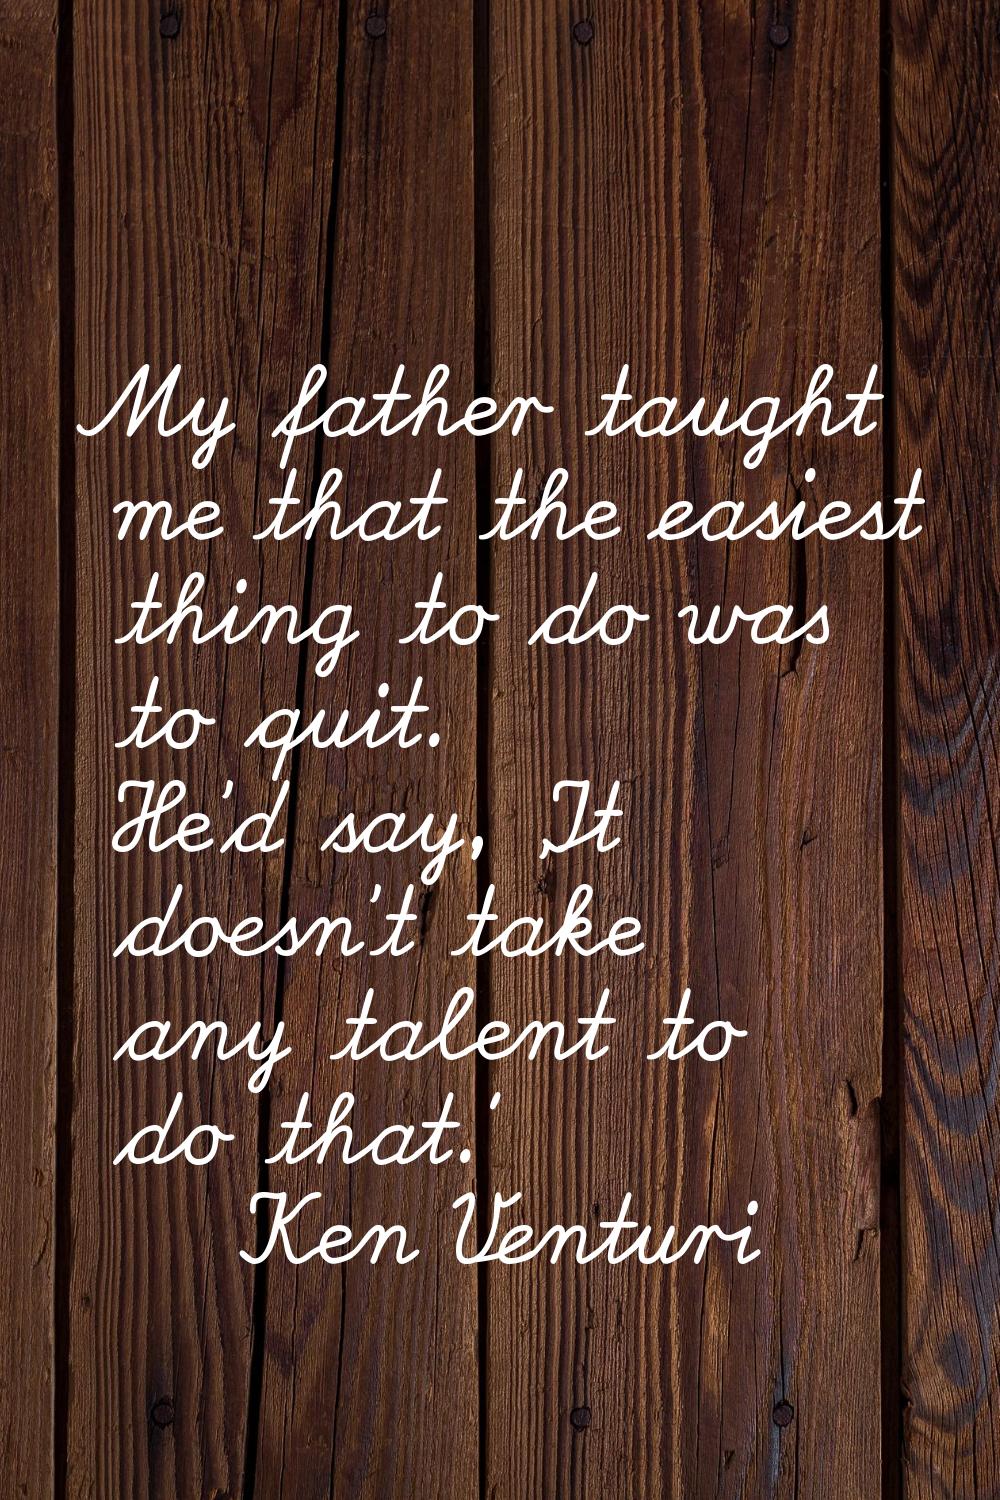 My father taught me that the easiest thing to do was to quit. He'd say, 'It doesn't take any talent